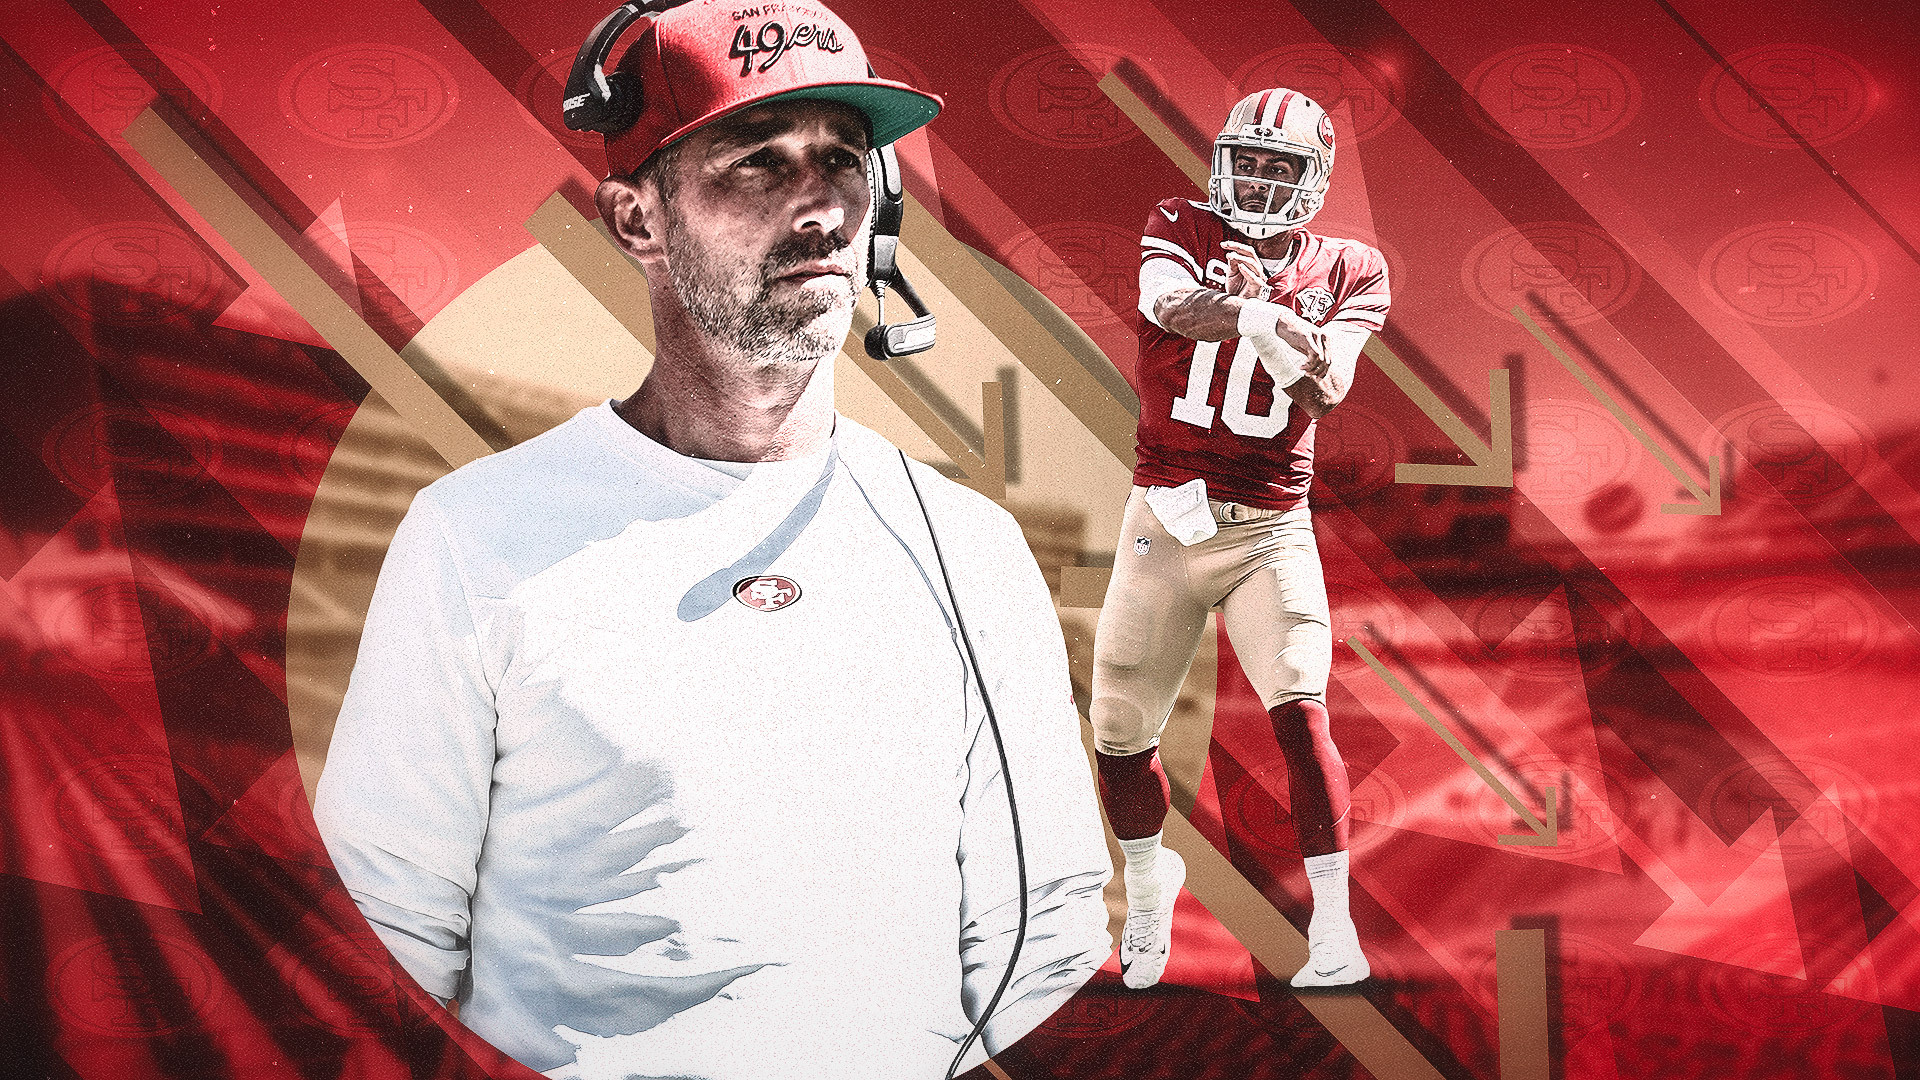 The San Francisco 49ers are widely considered an elite franchise, but that might be changing